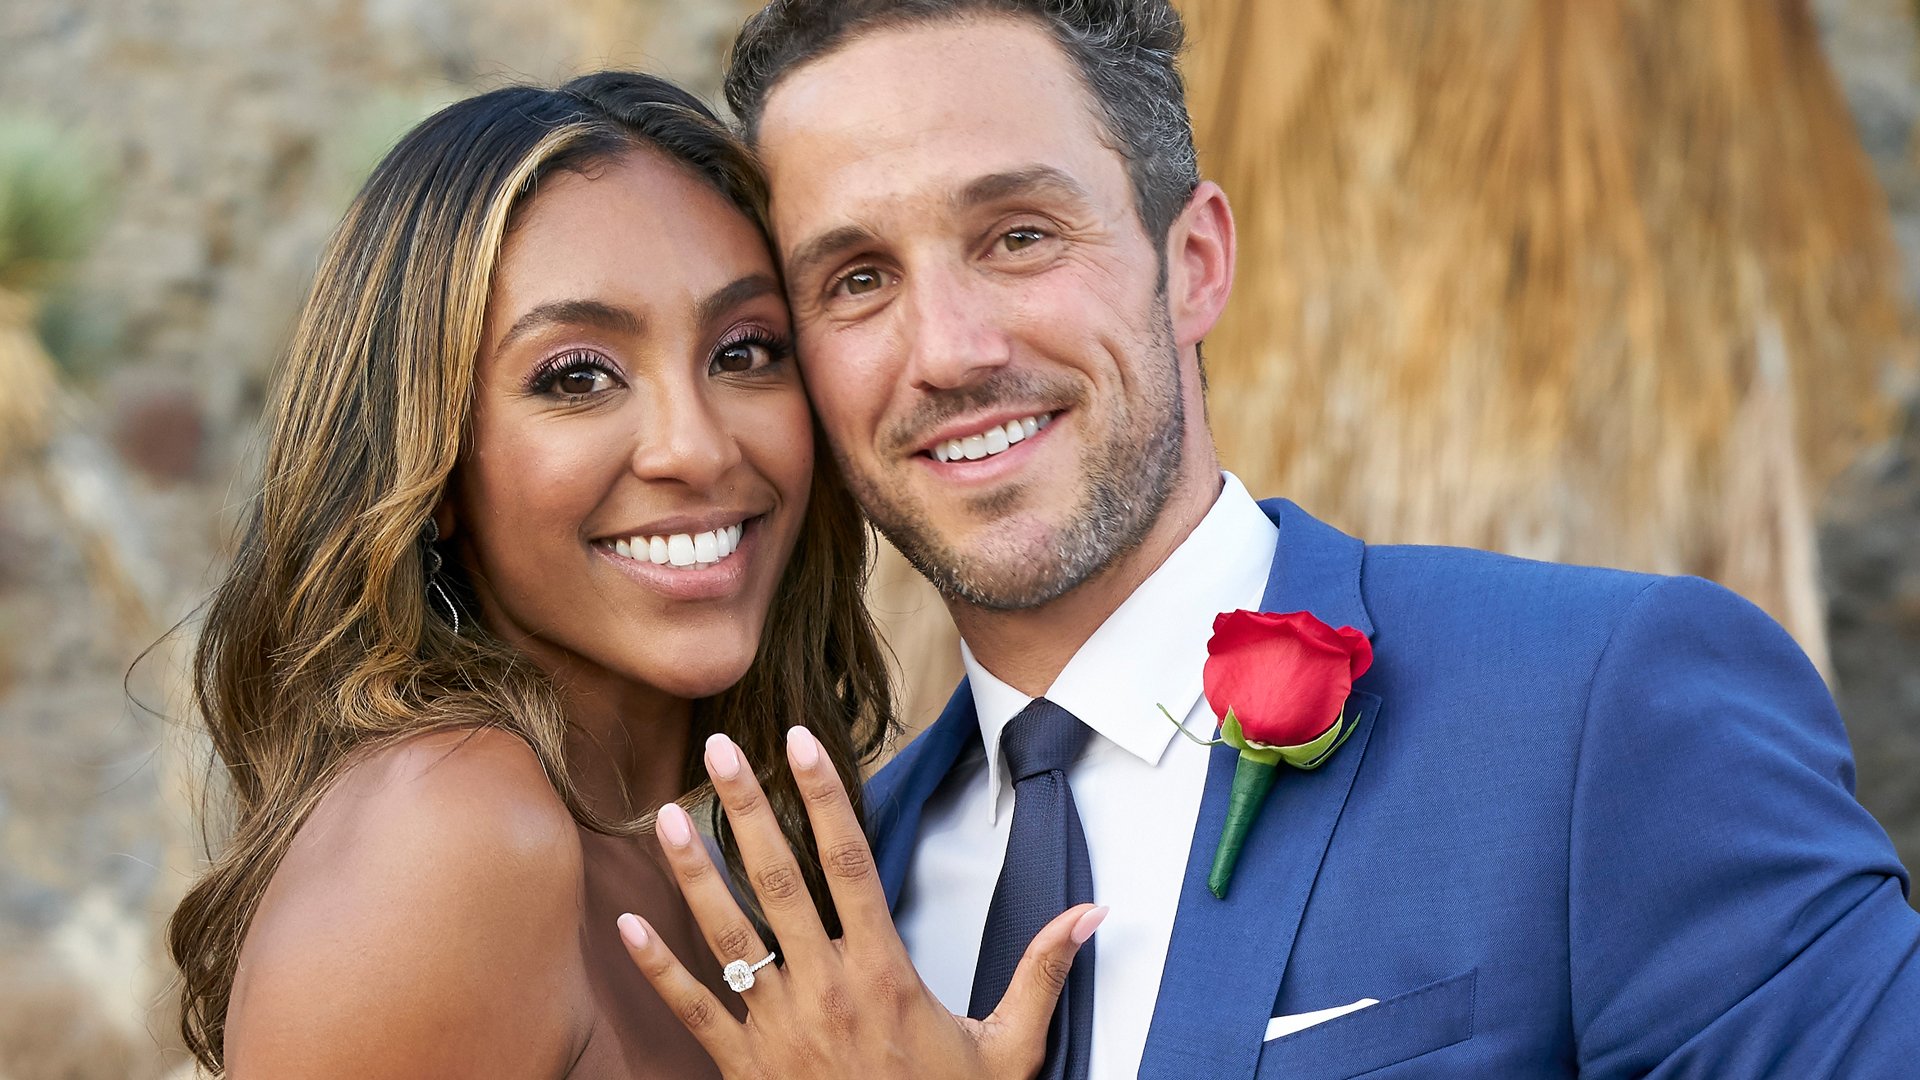 'The Bachelorette' Season 16 finale behind the scenes with Tayshia Adams and Zac Clark with their engagement ring